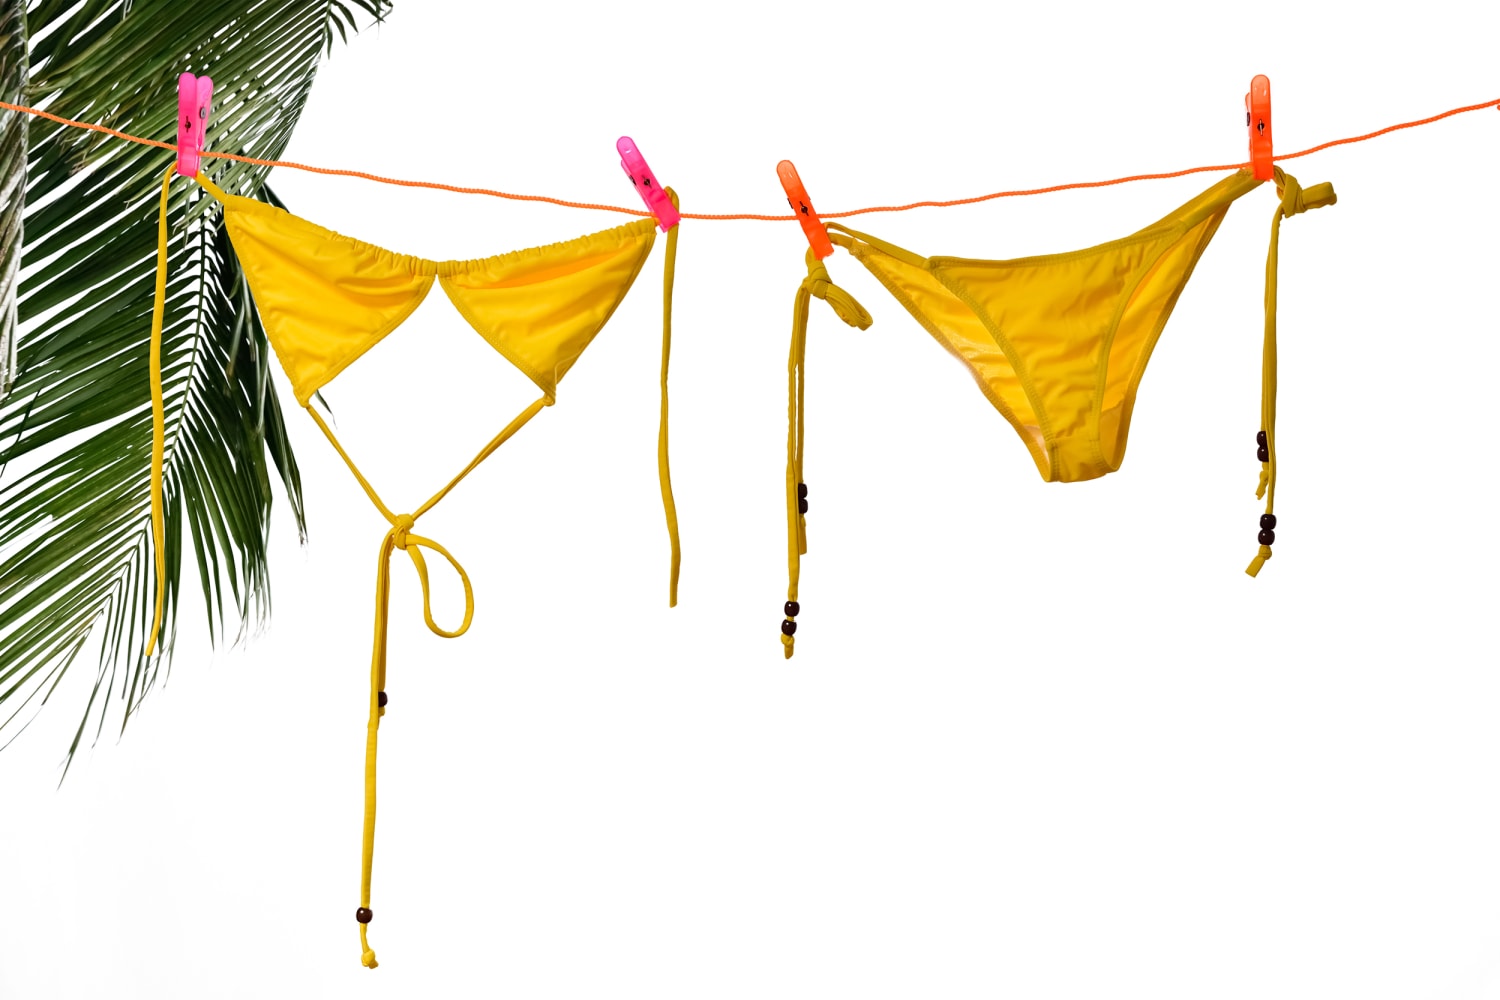 How To Clean Your Bathing Suits, How To Wash Swimwear